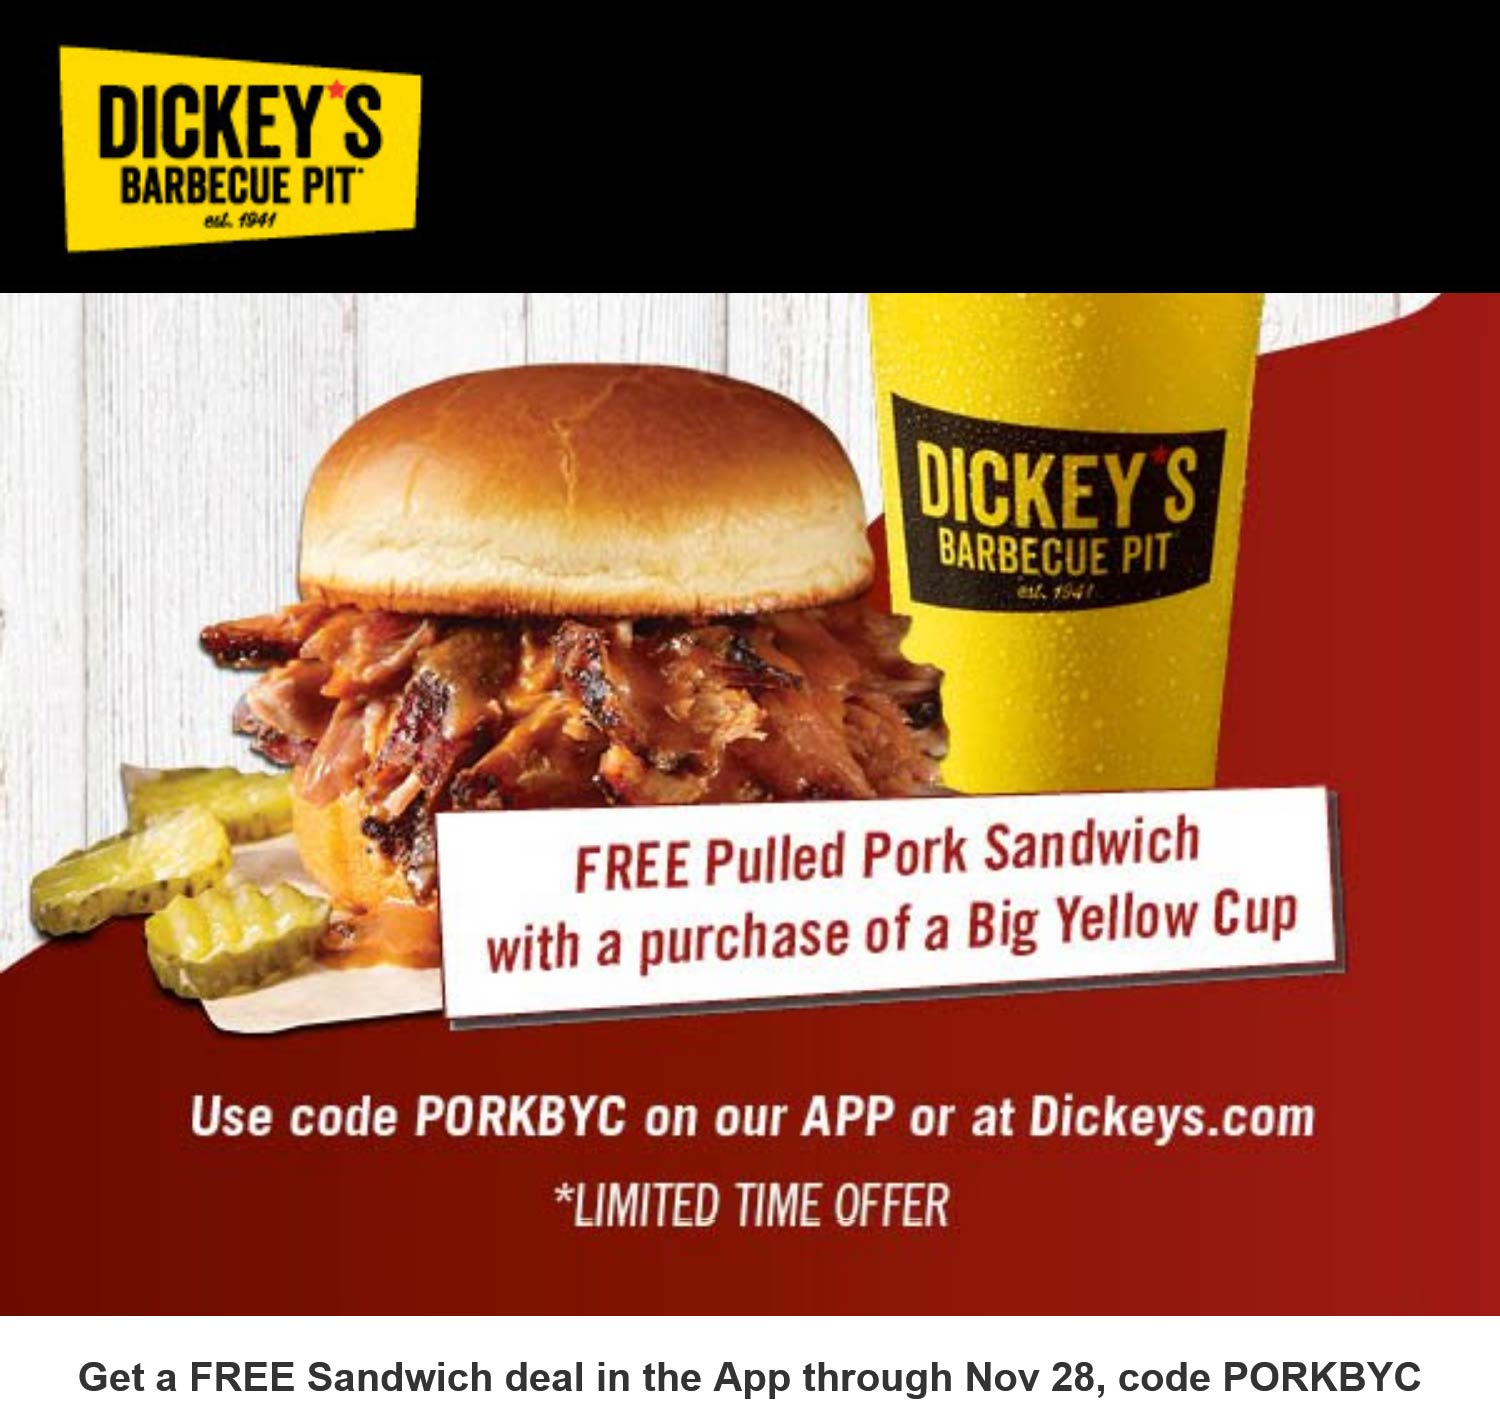 Dickeys Barbecue Pit restaurants Coupon  Free pork sandwich with your cup online at Dickeys Barbecue Pit via promo code PORKBYC #dickeysbarbecuepit 